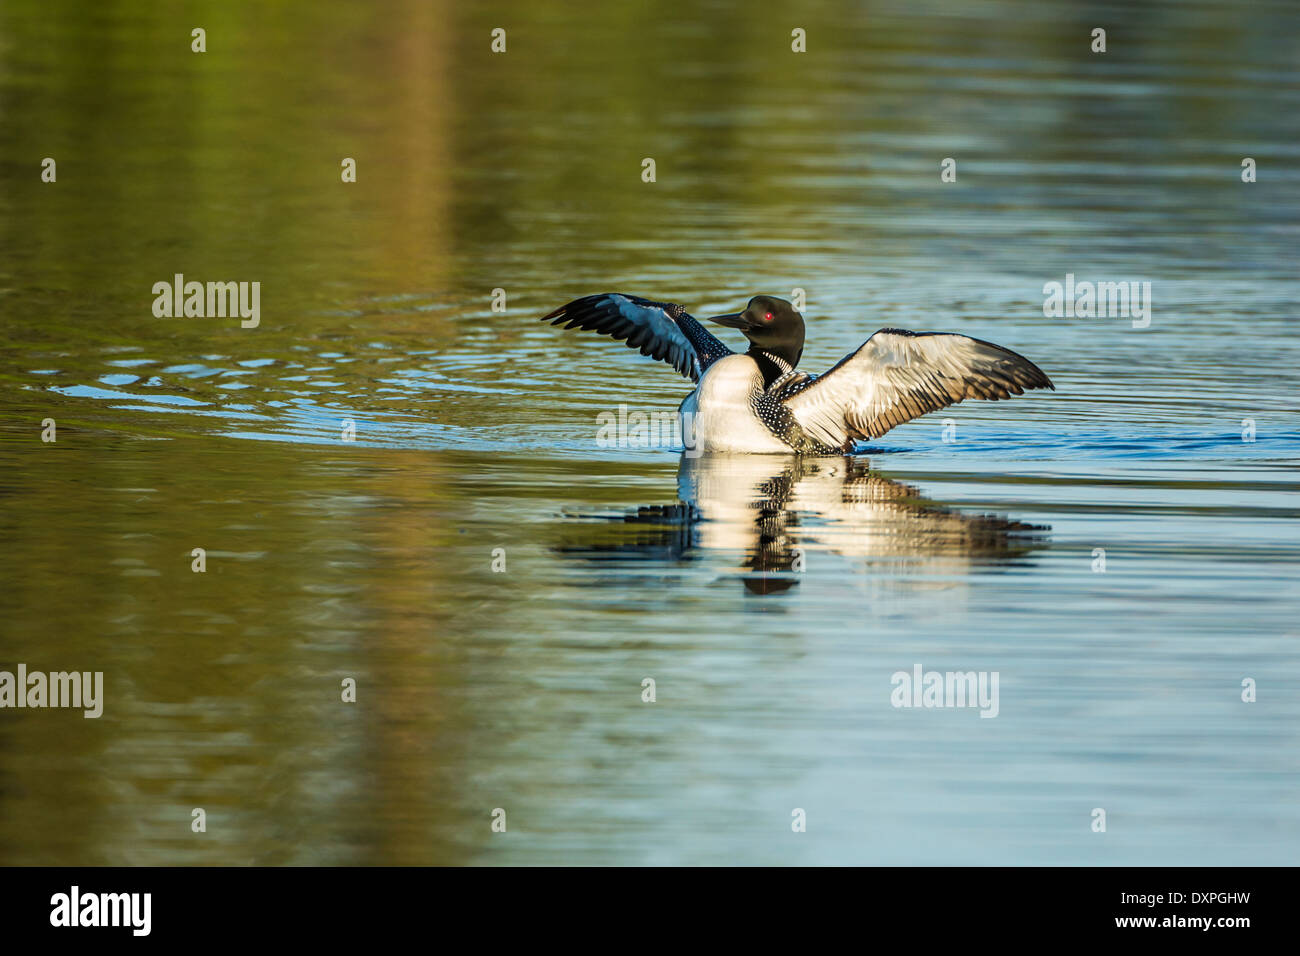 A Great Northern Loon swims and displays its breeding plumage on Wild Rose Lake in Kananaskis, Alberta, Canada. Stock Photo